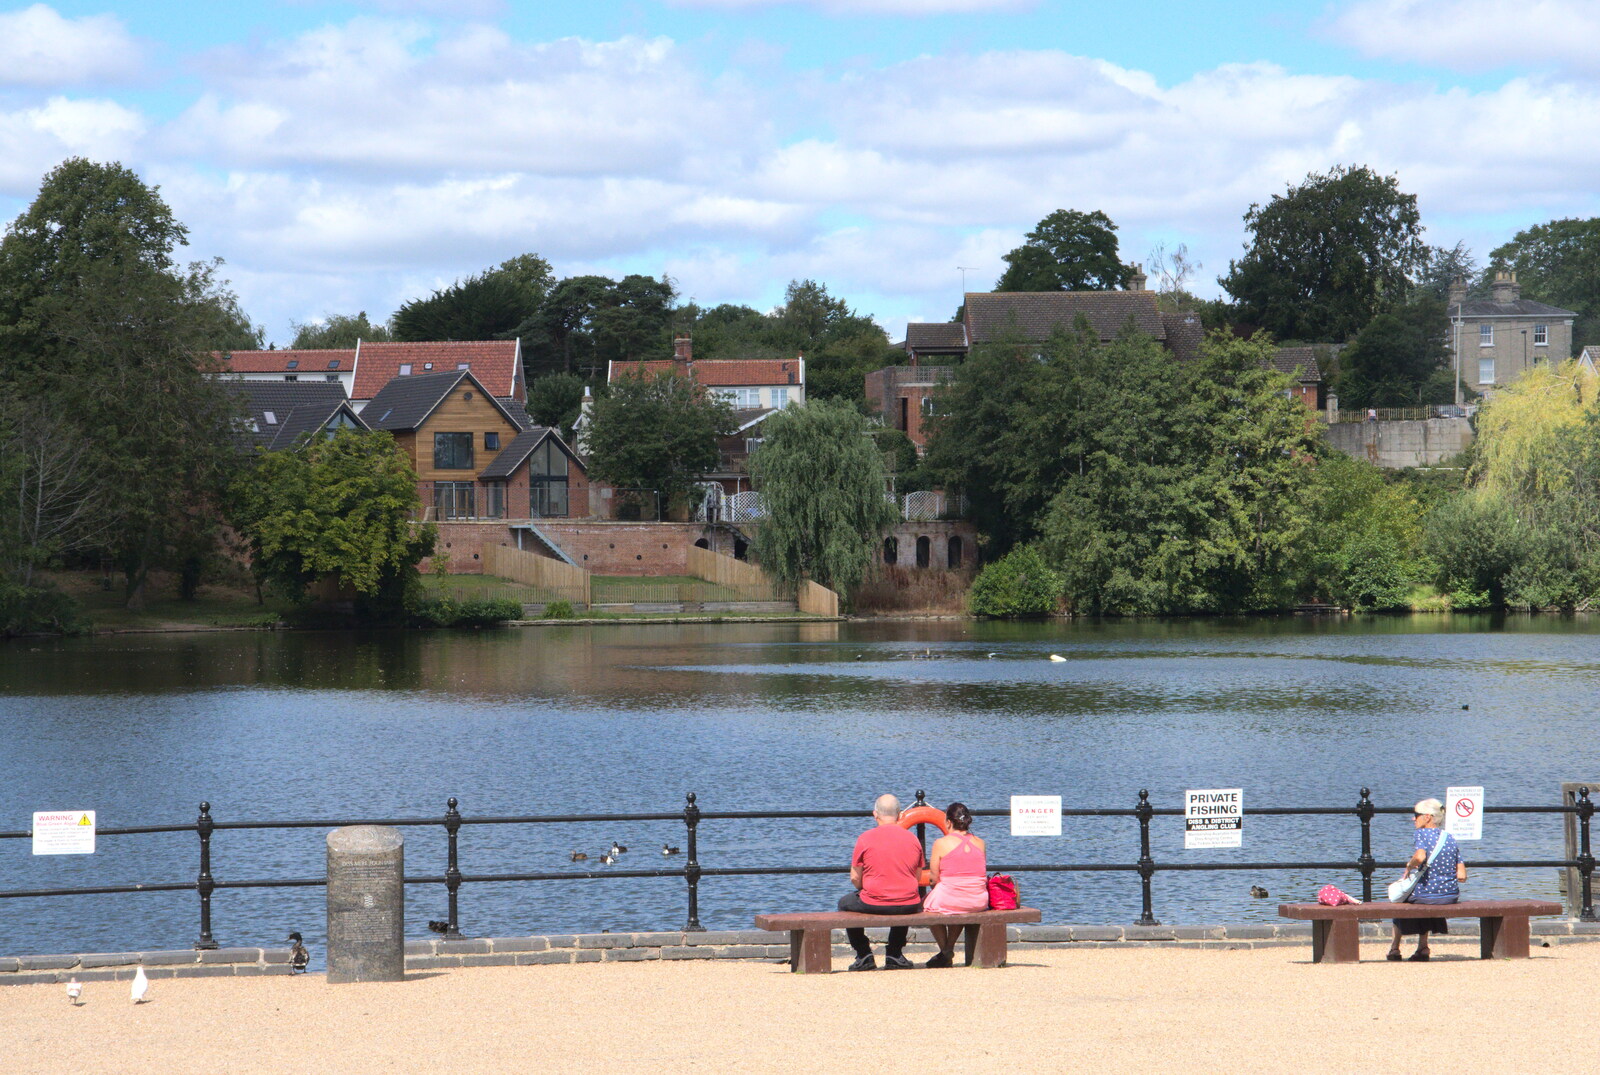 People look out over the Mere from Closed-Down Shops, Hedgehogs and Chamomile, Brome and Diss - 2nd August 2020